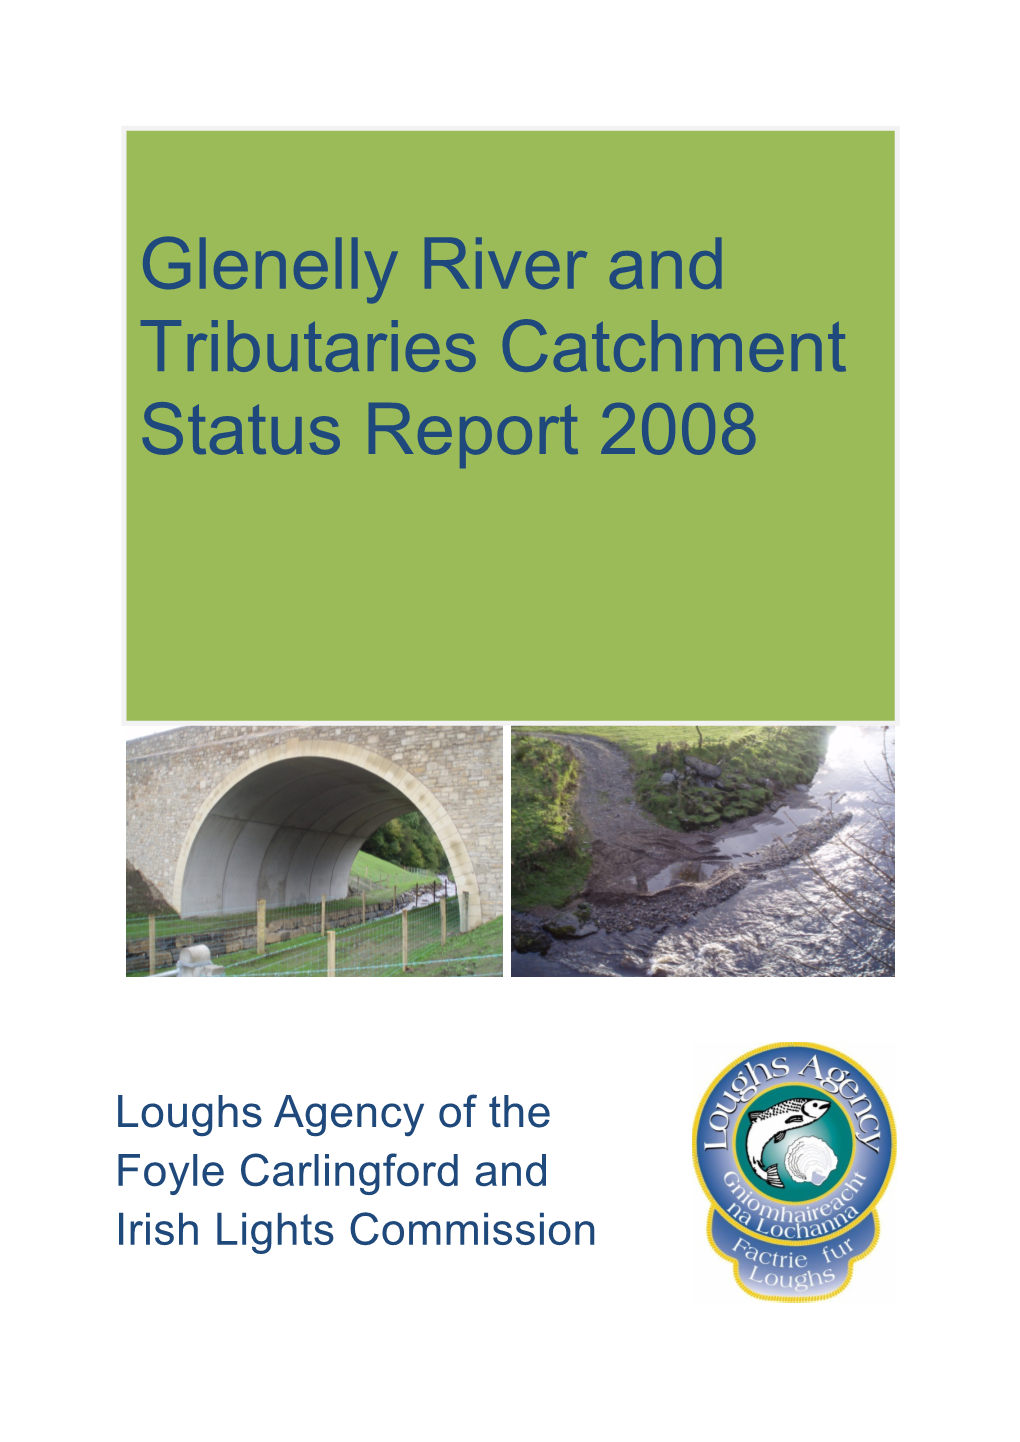 Glenelly River and Tributaries Catchment Status Report 2008